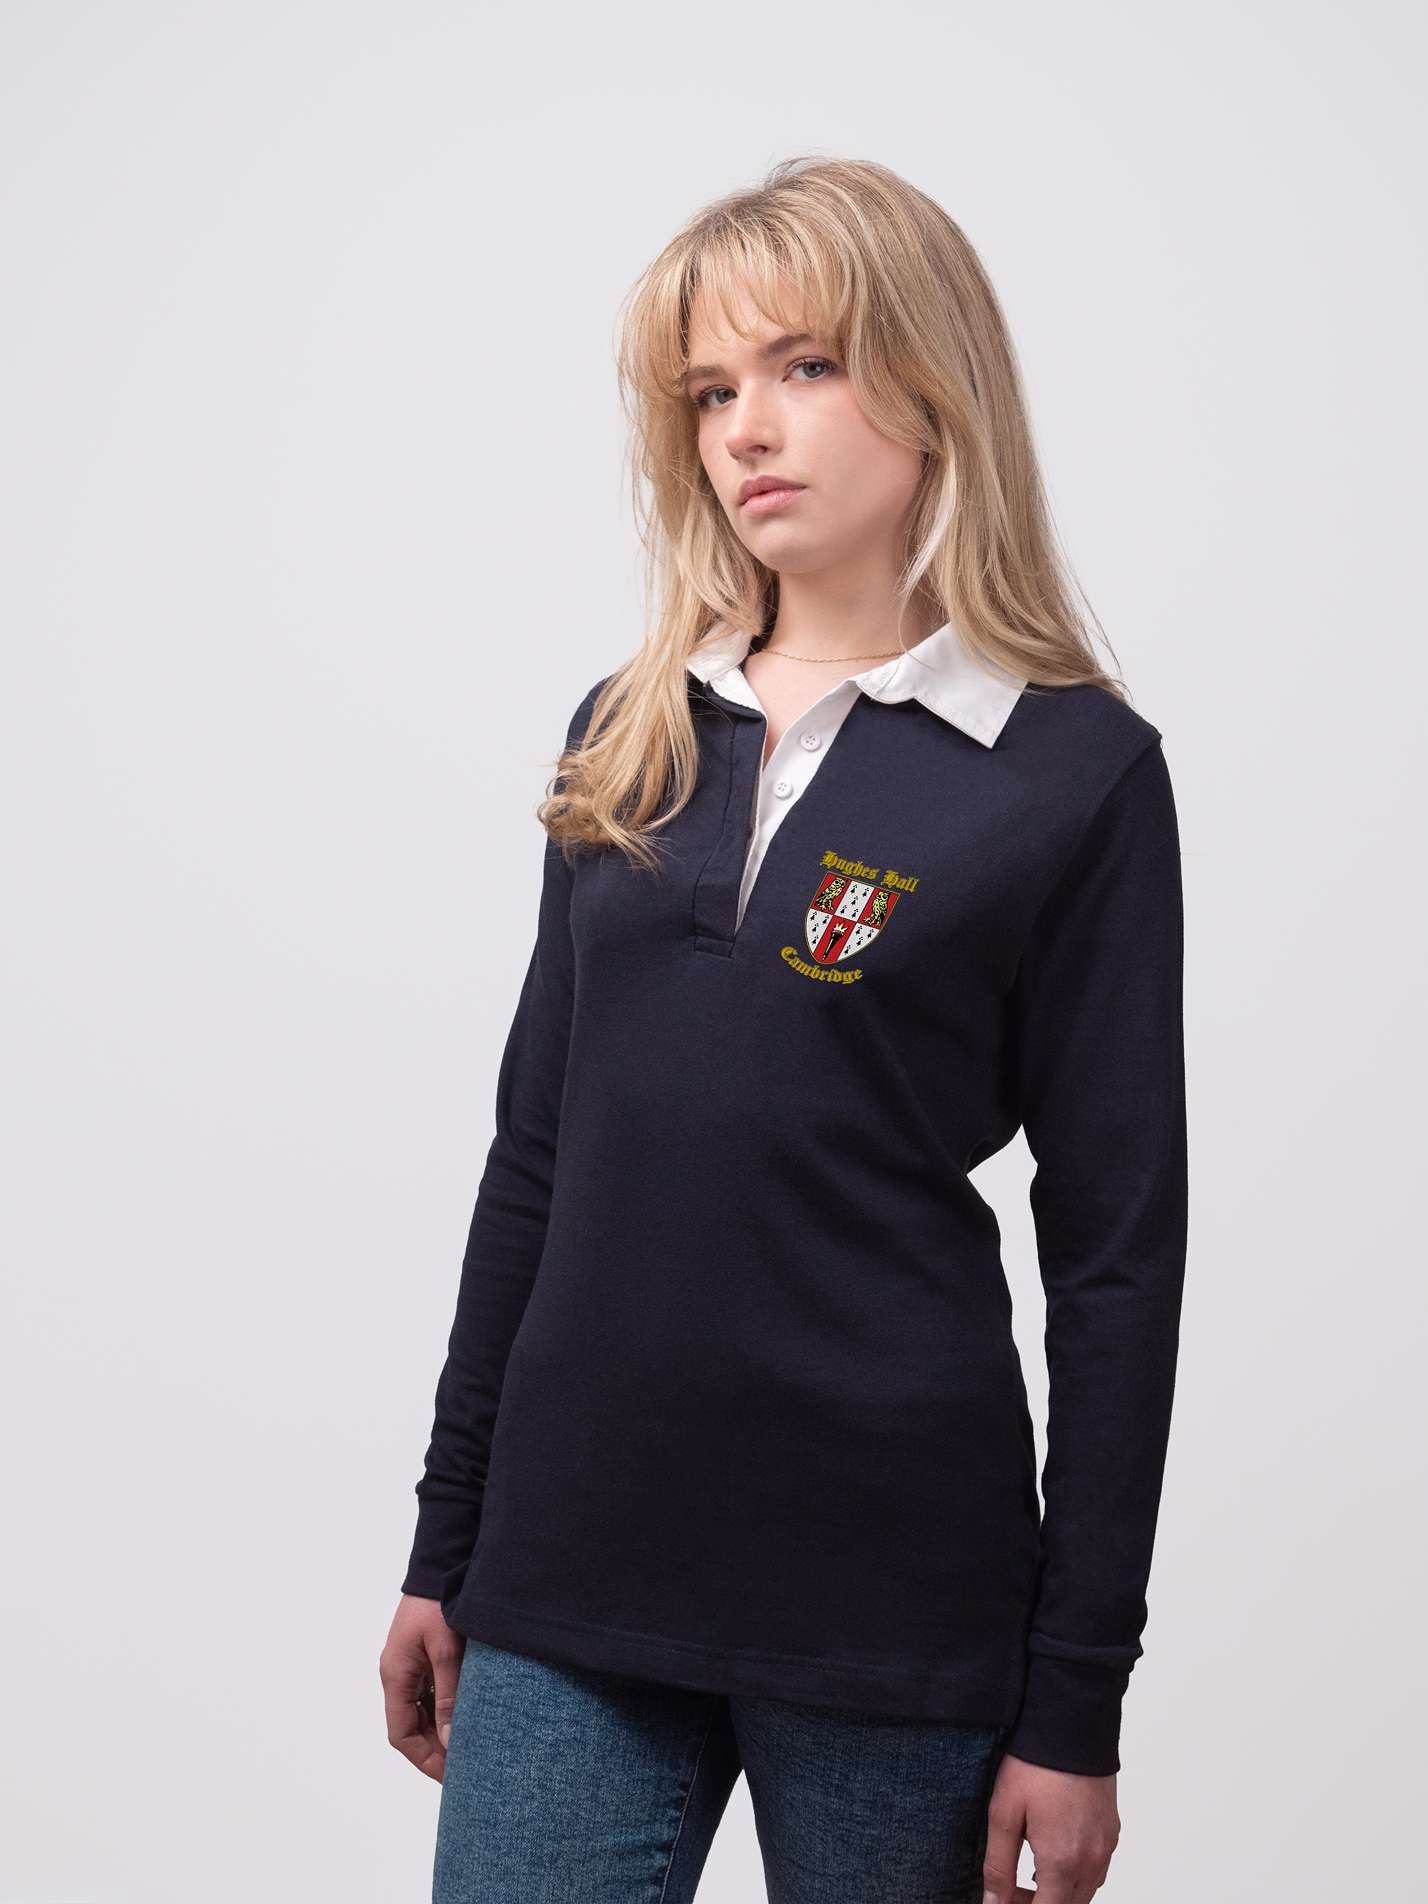 Student wearing a navy Hughes Hall College rugby shirt with embroidered crest